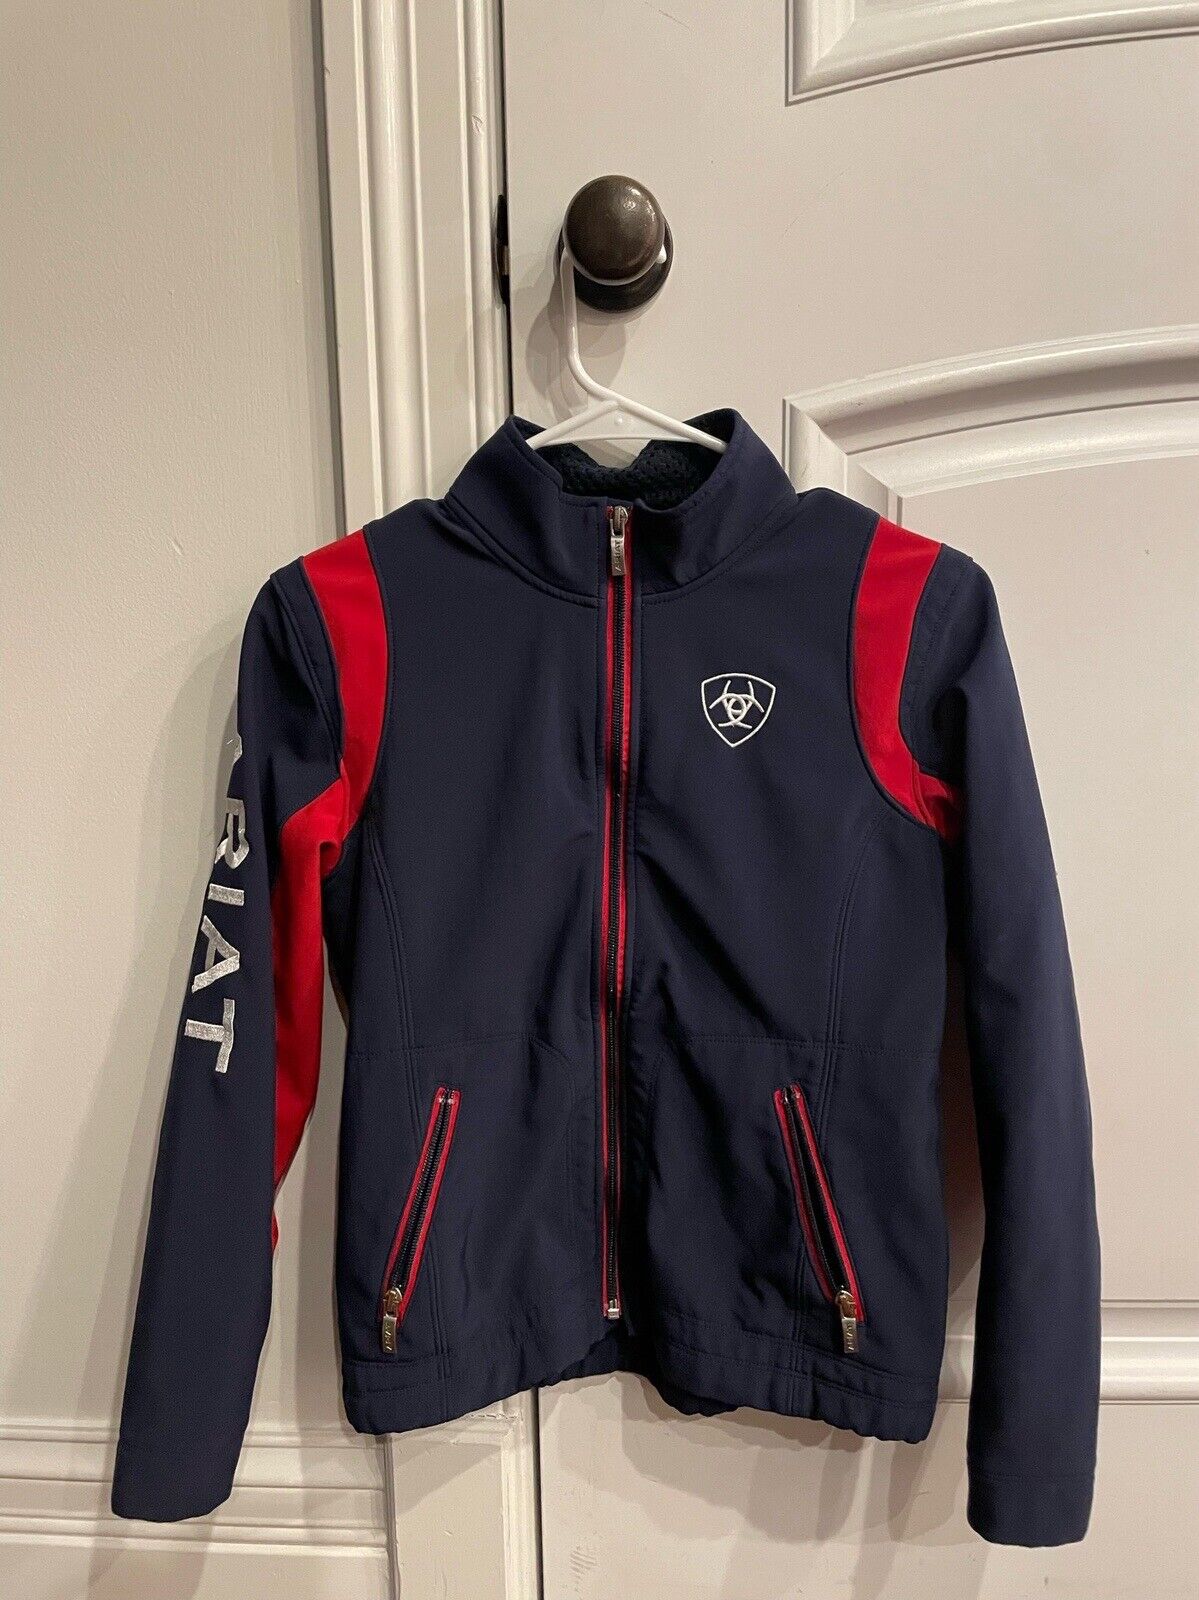 Ariat Youth Team Navy & Red Softshell Full-zip Jacket - Size 12 (large)